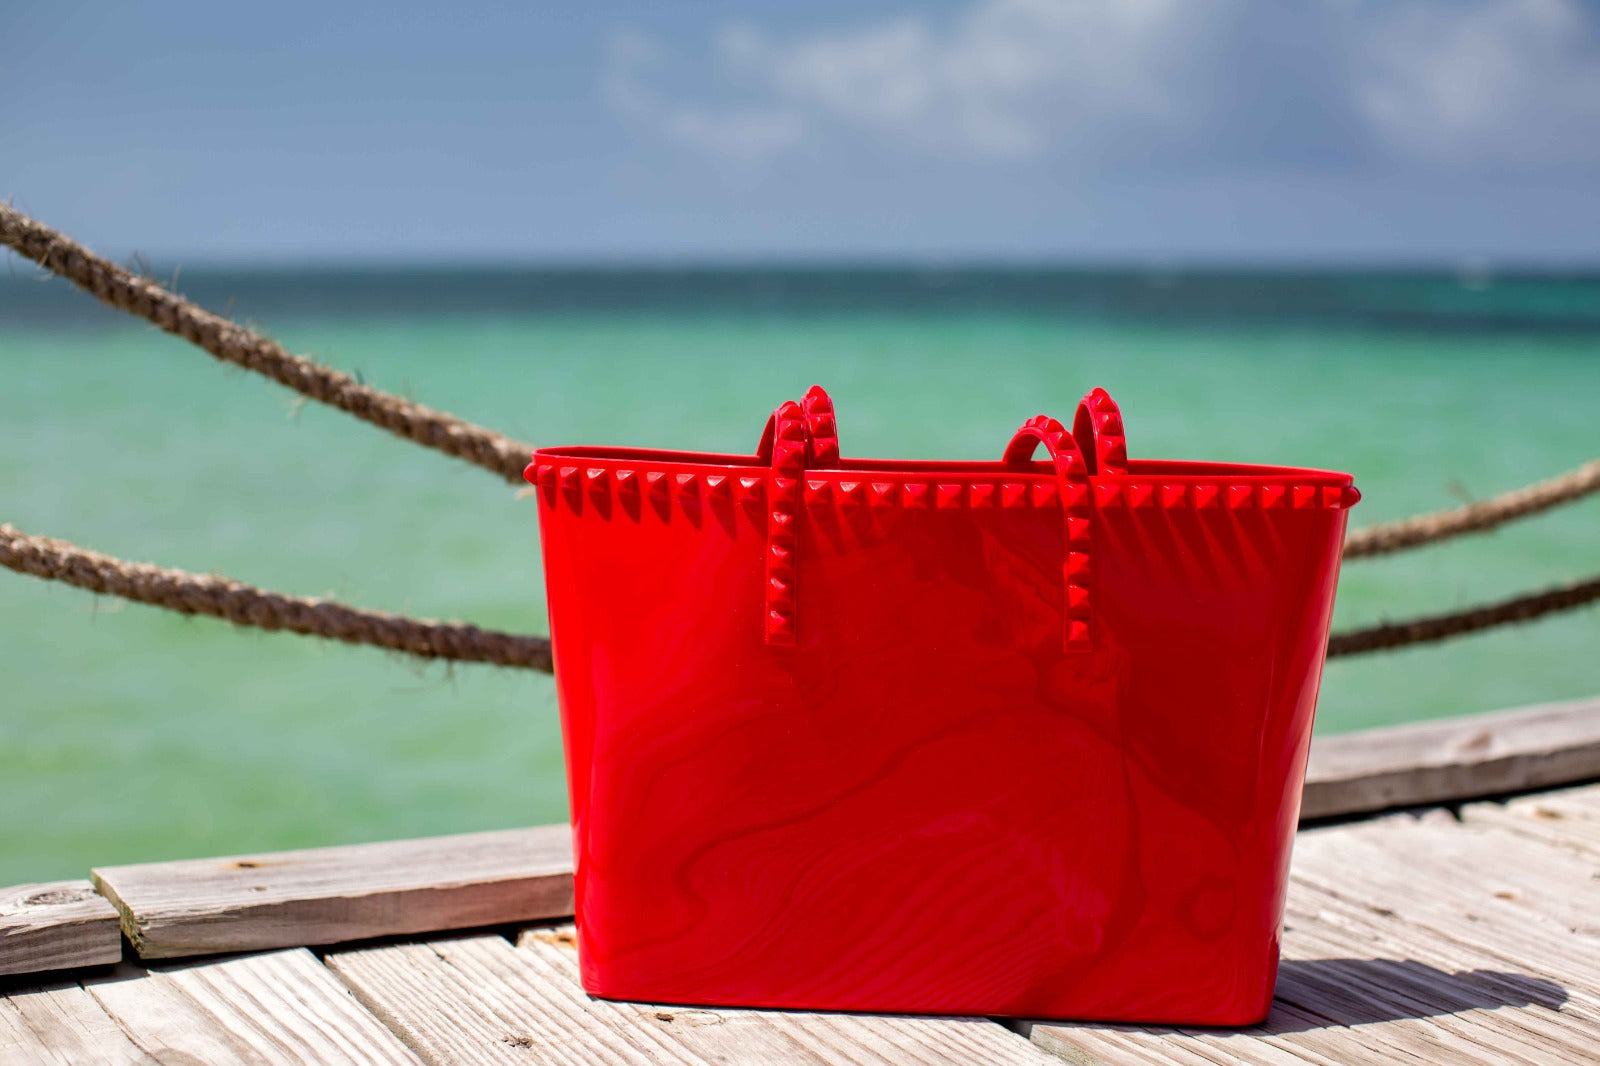 Waterproof Carmen Sol studded beach bags for women in color red